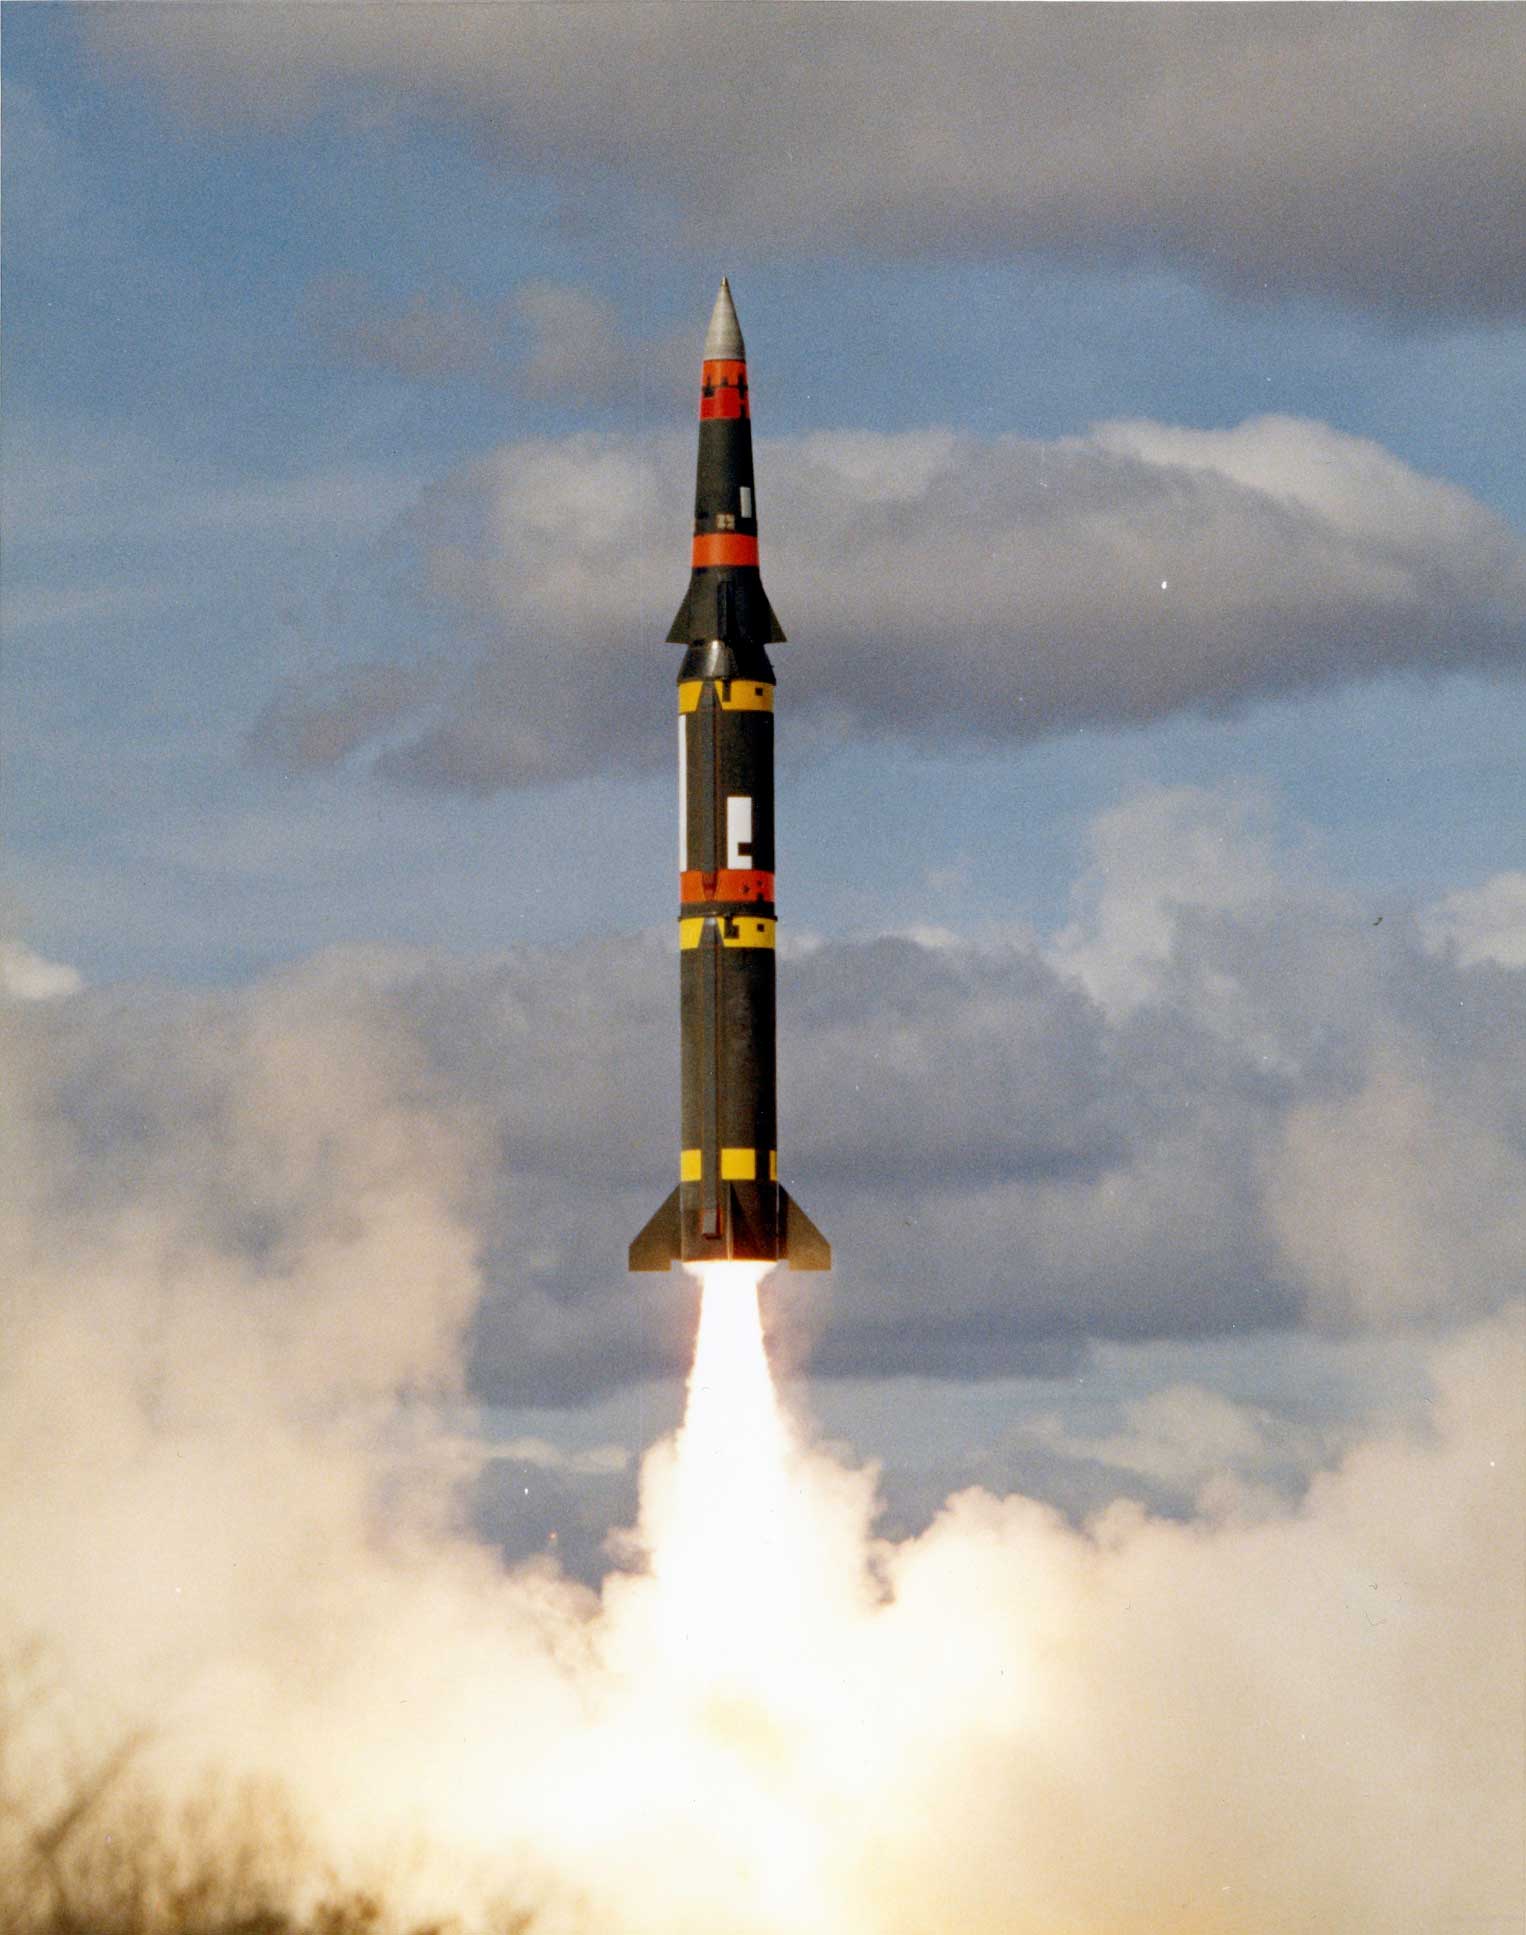 A test launch of the Pershing II missile